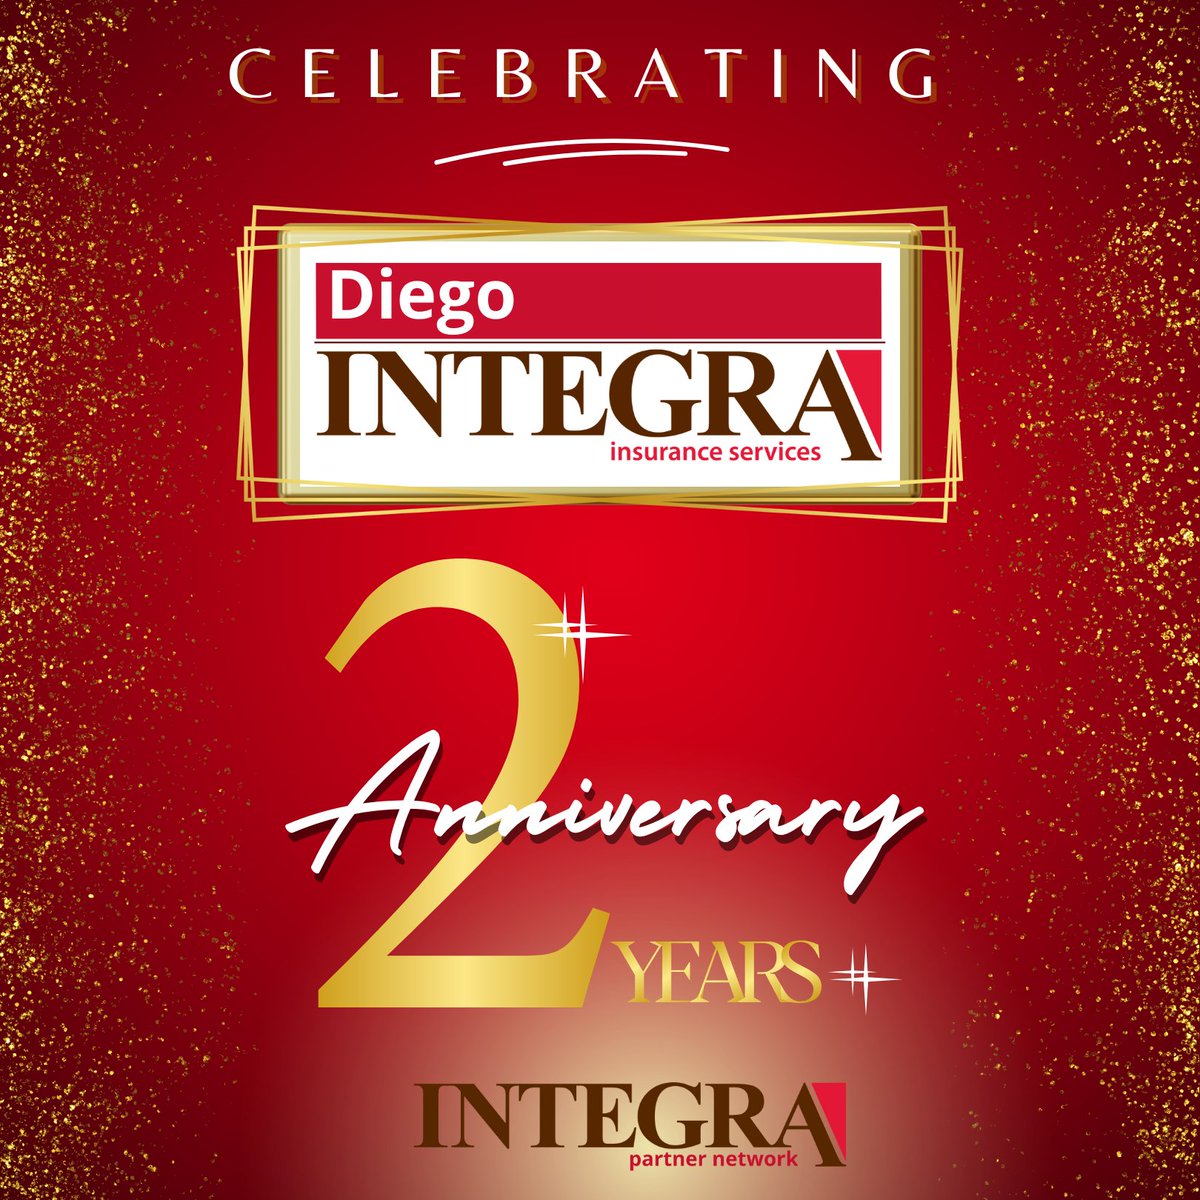 Excited to celebrate two years of success with Diego Integra Insurance and the Integra Partner Network!

Are you ready to find your way with Integra?

#integrapartnernetwork #independentagent #findyourway #integra #insurance #insuranceagent #insuranceagency #integrainspires